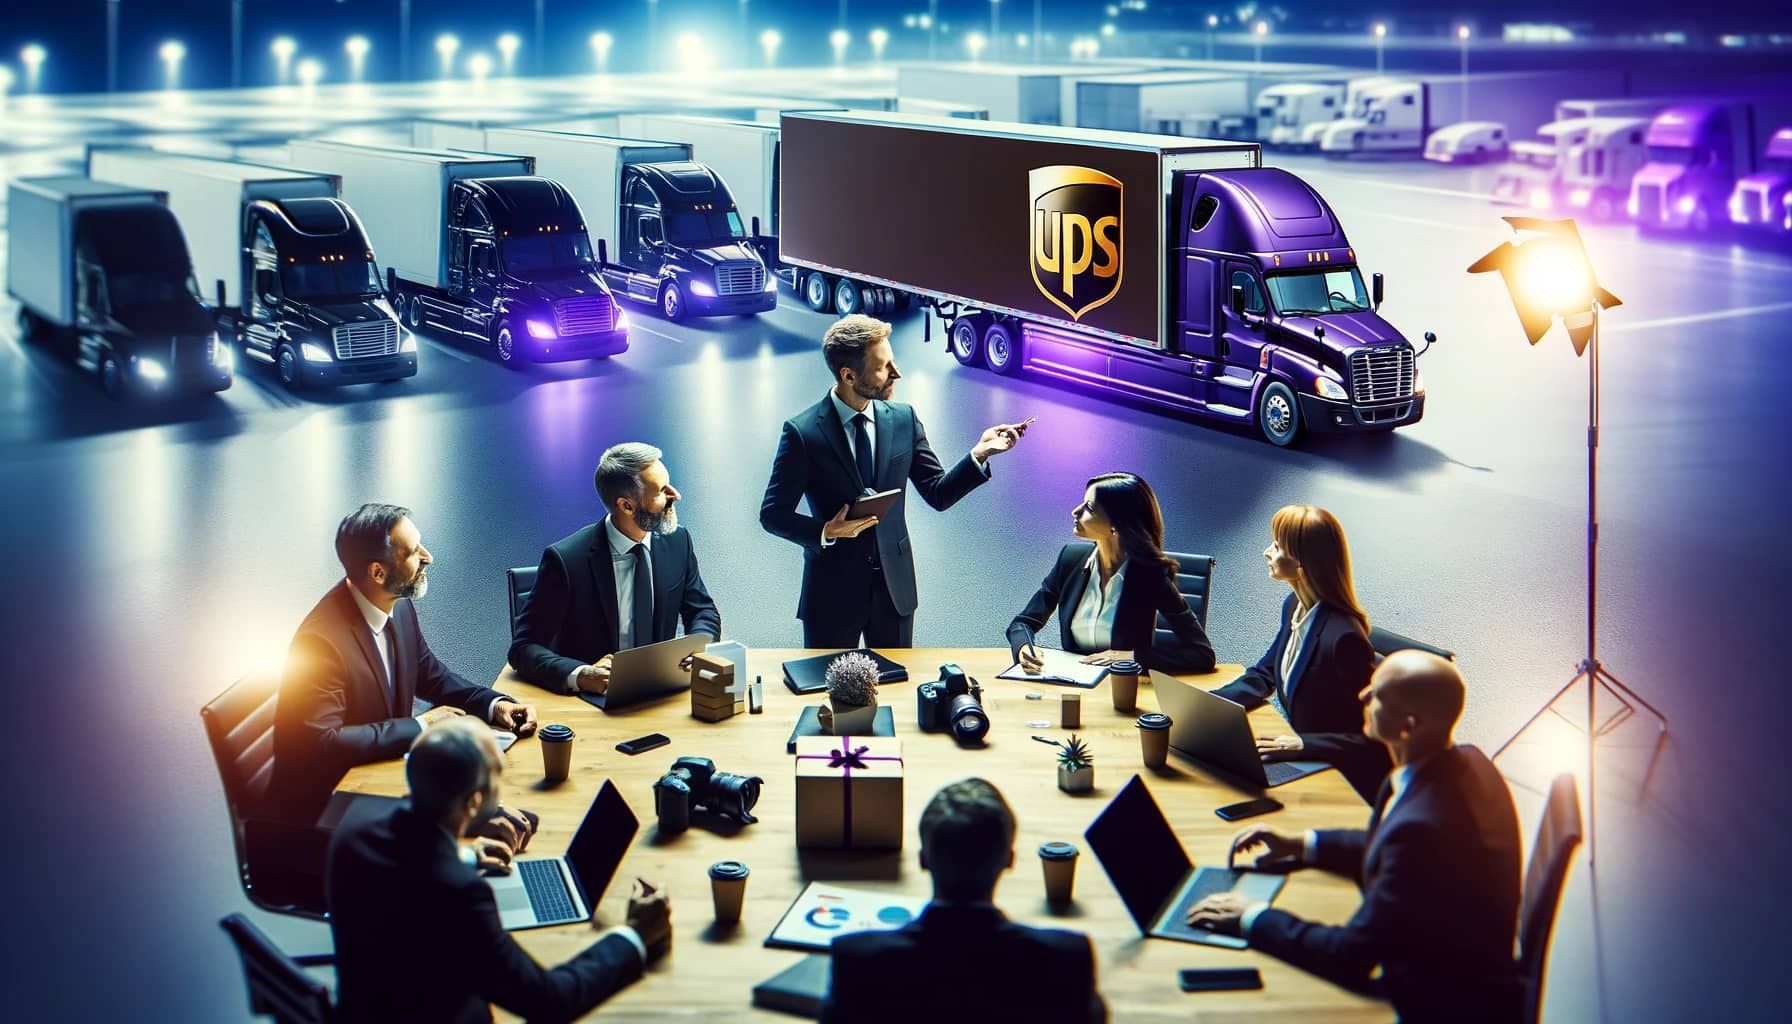 A group of people are sitting around a table with a purple ups truck in the background.